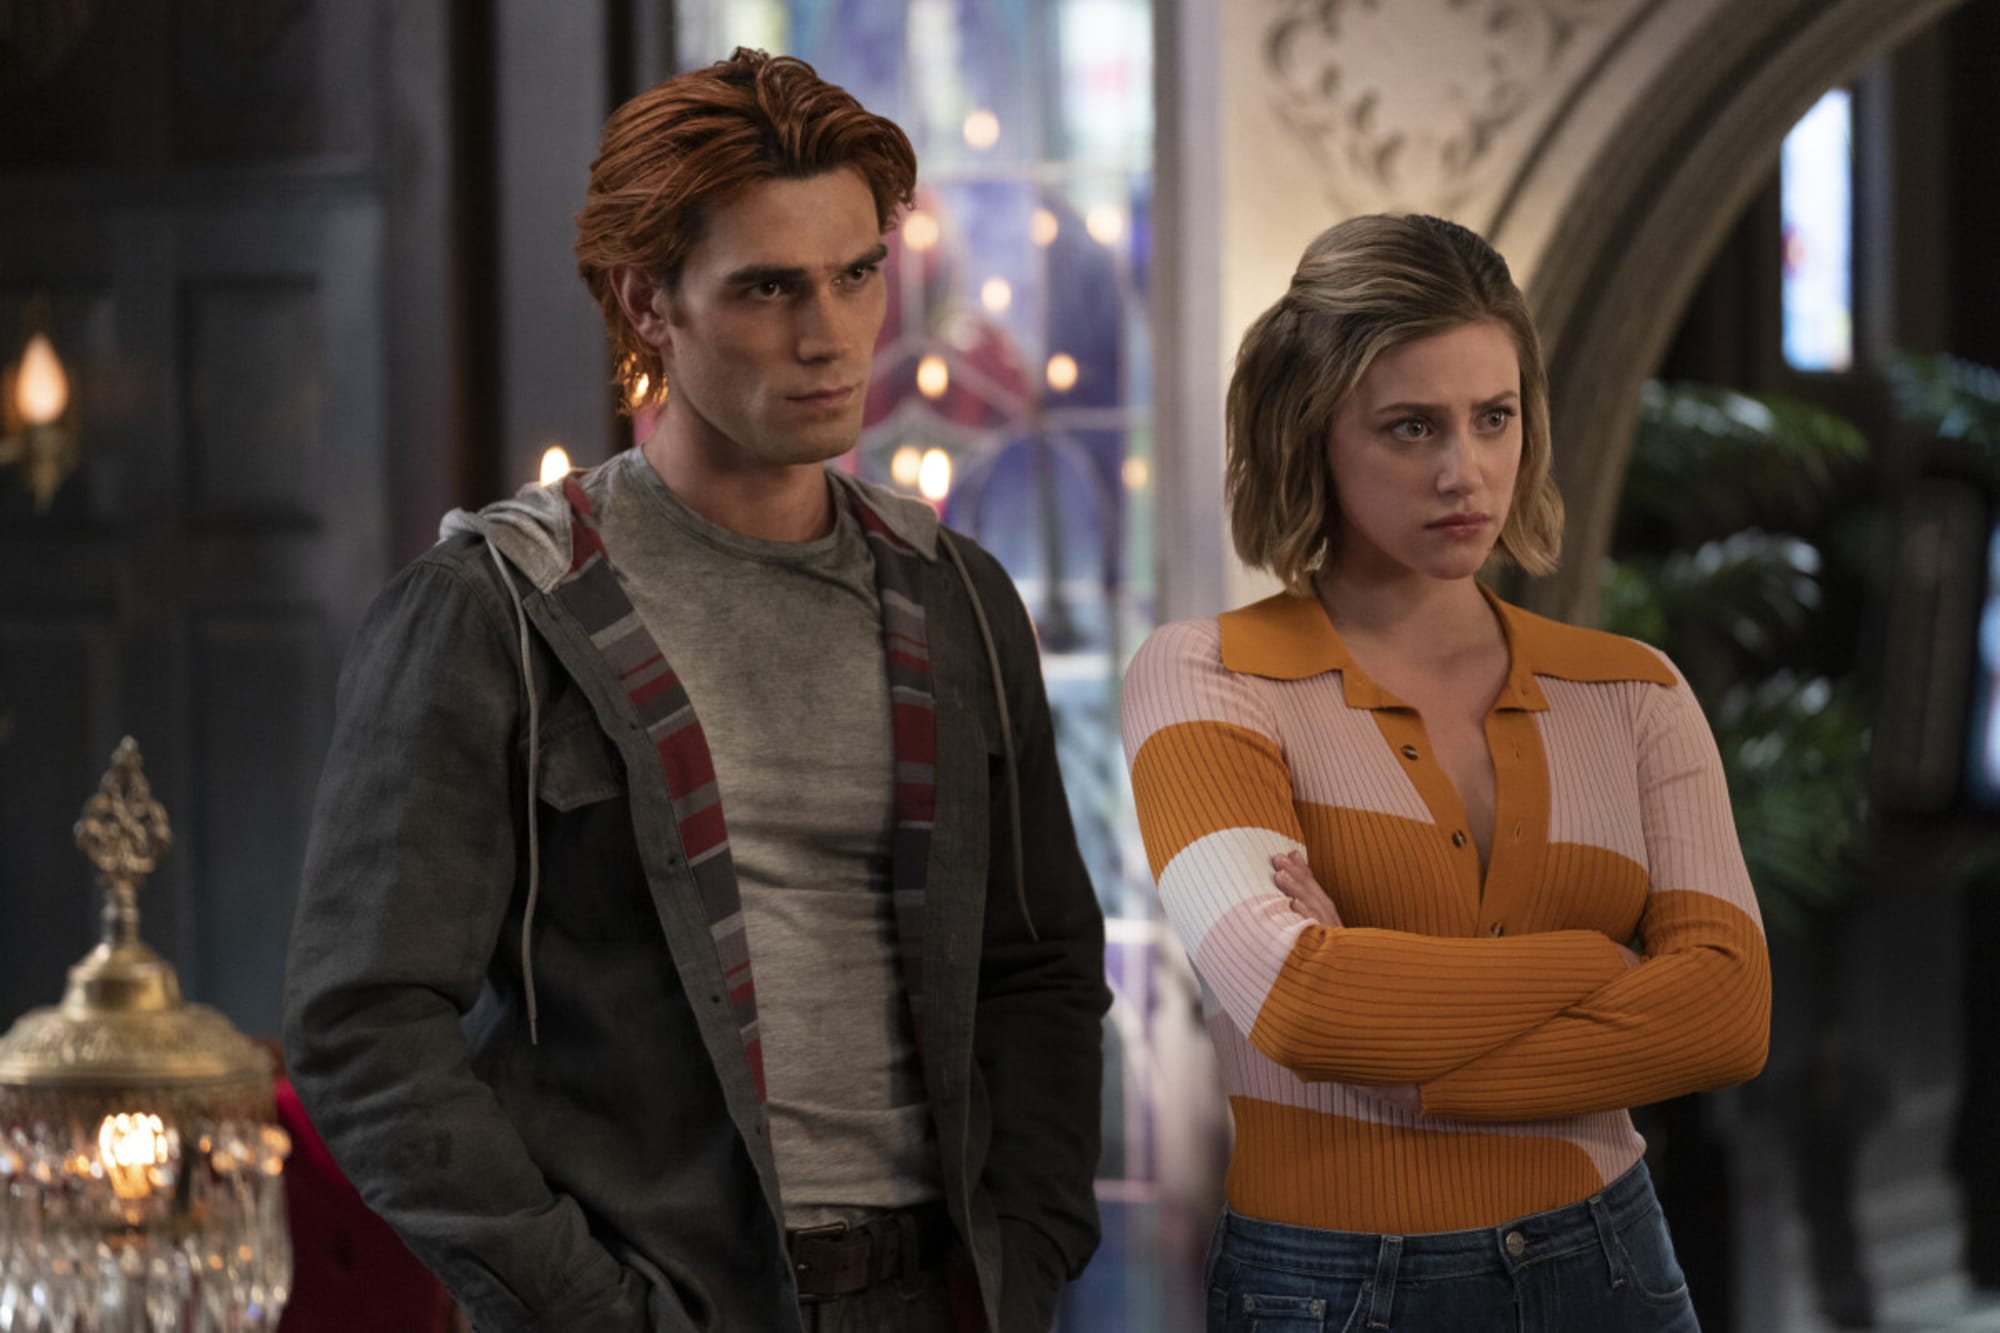 Riverdale season 7 is not coming to The CW in 2022